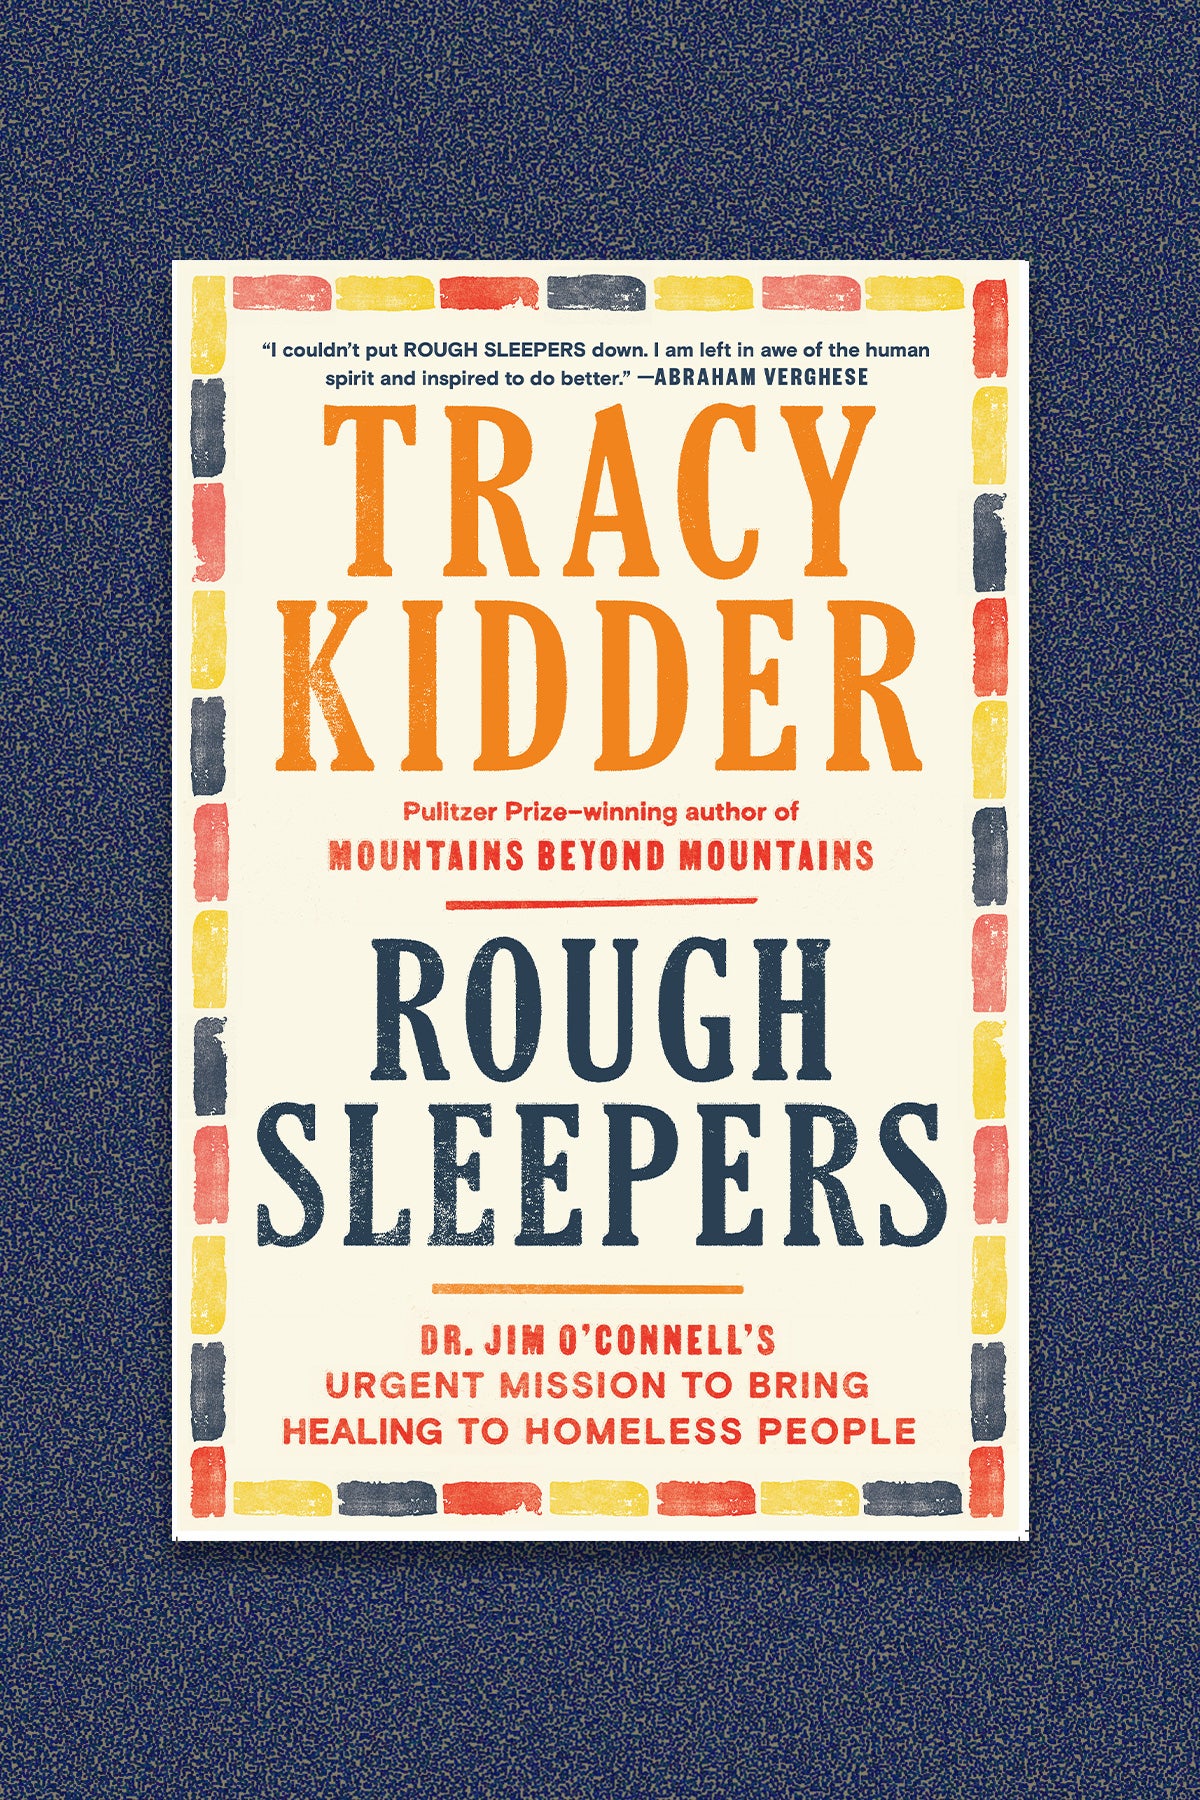 Book Cover for “Rough Sleepers: Dr. Jim O’Connell’s Urgent Mission to Bring Healing to Homeless People by Tracy Kidder”. The cover is placed on a blue-speckled background.